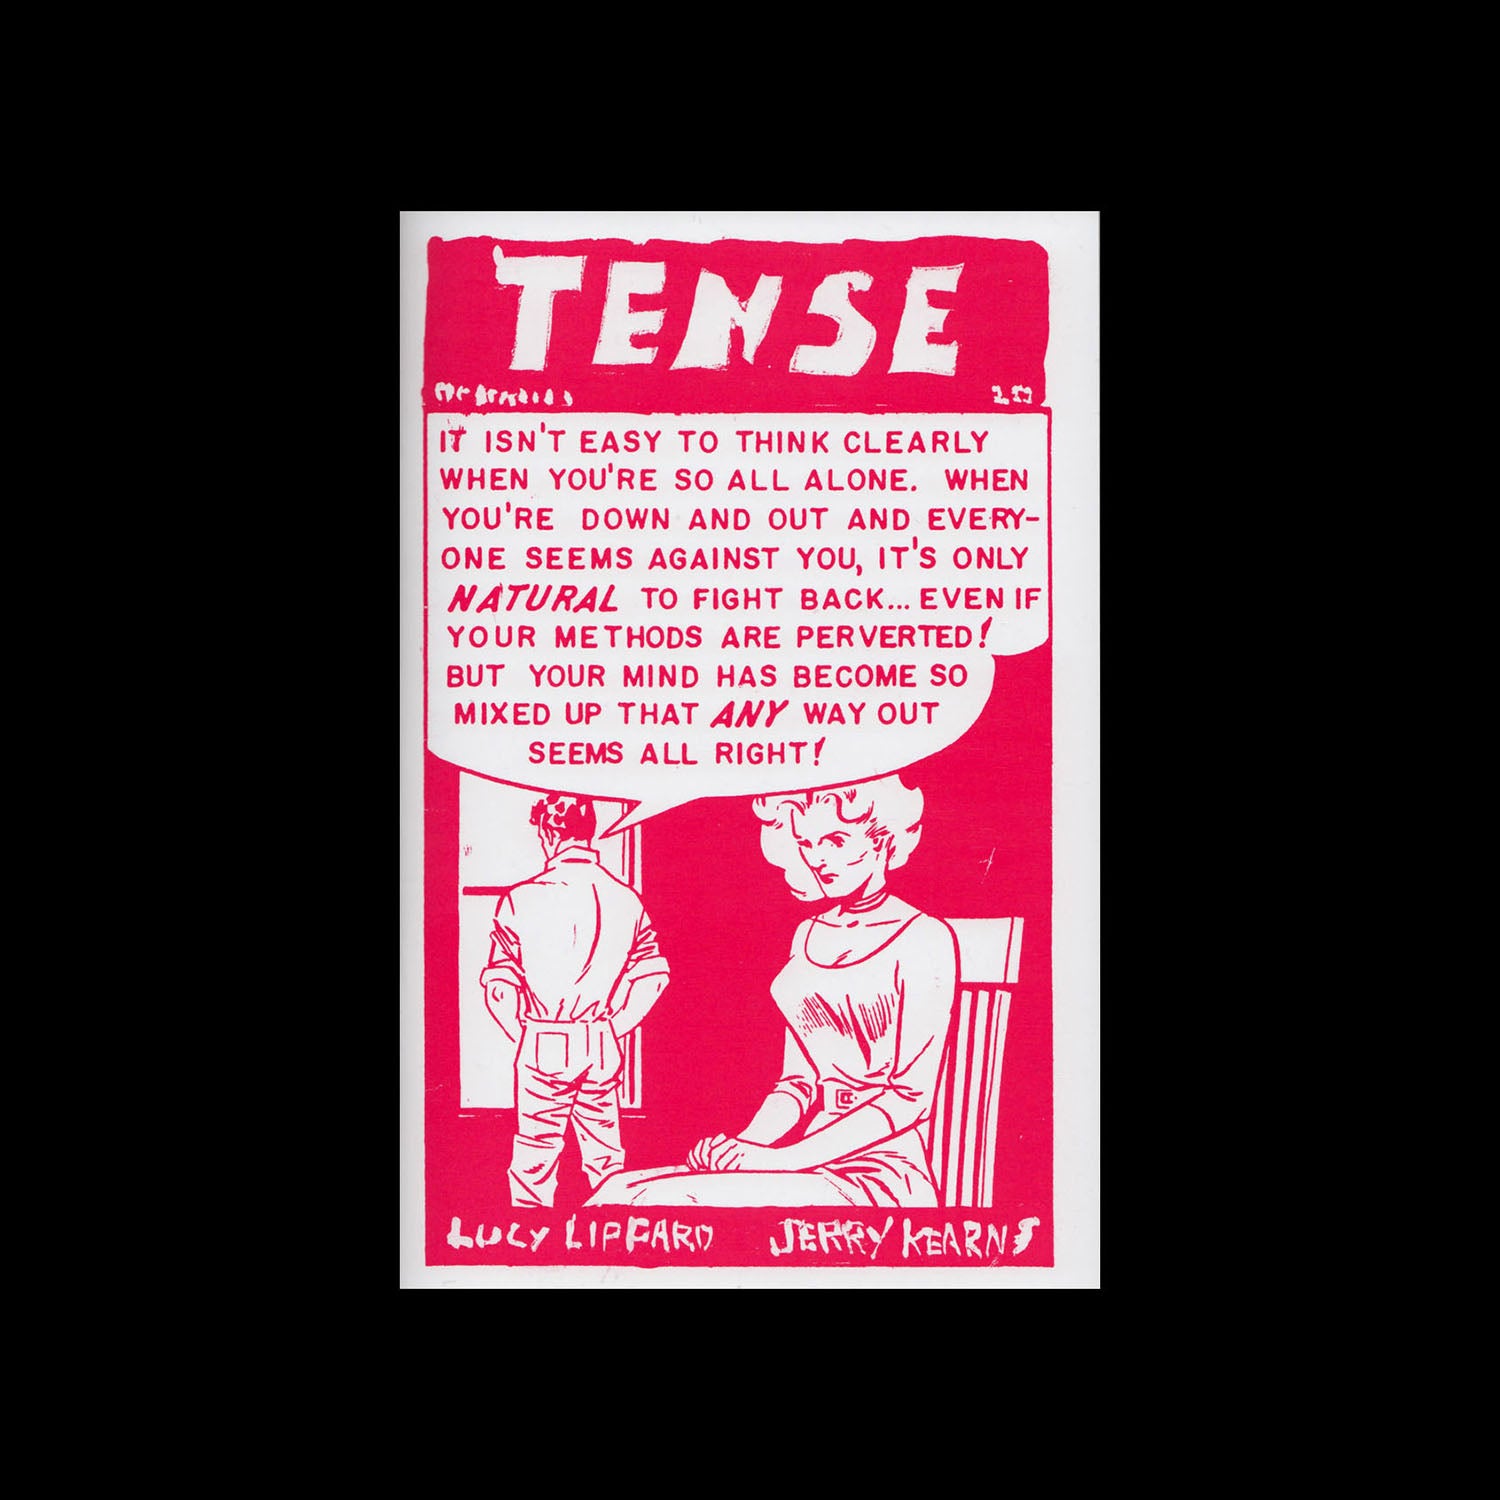 Lucy Lippard And Jerry Kearns - Tense